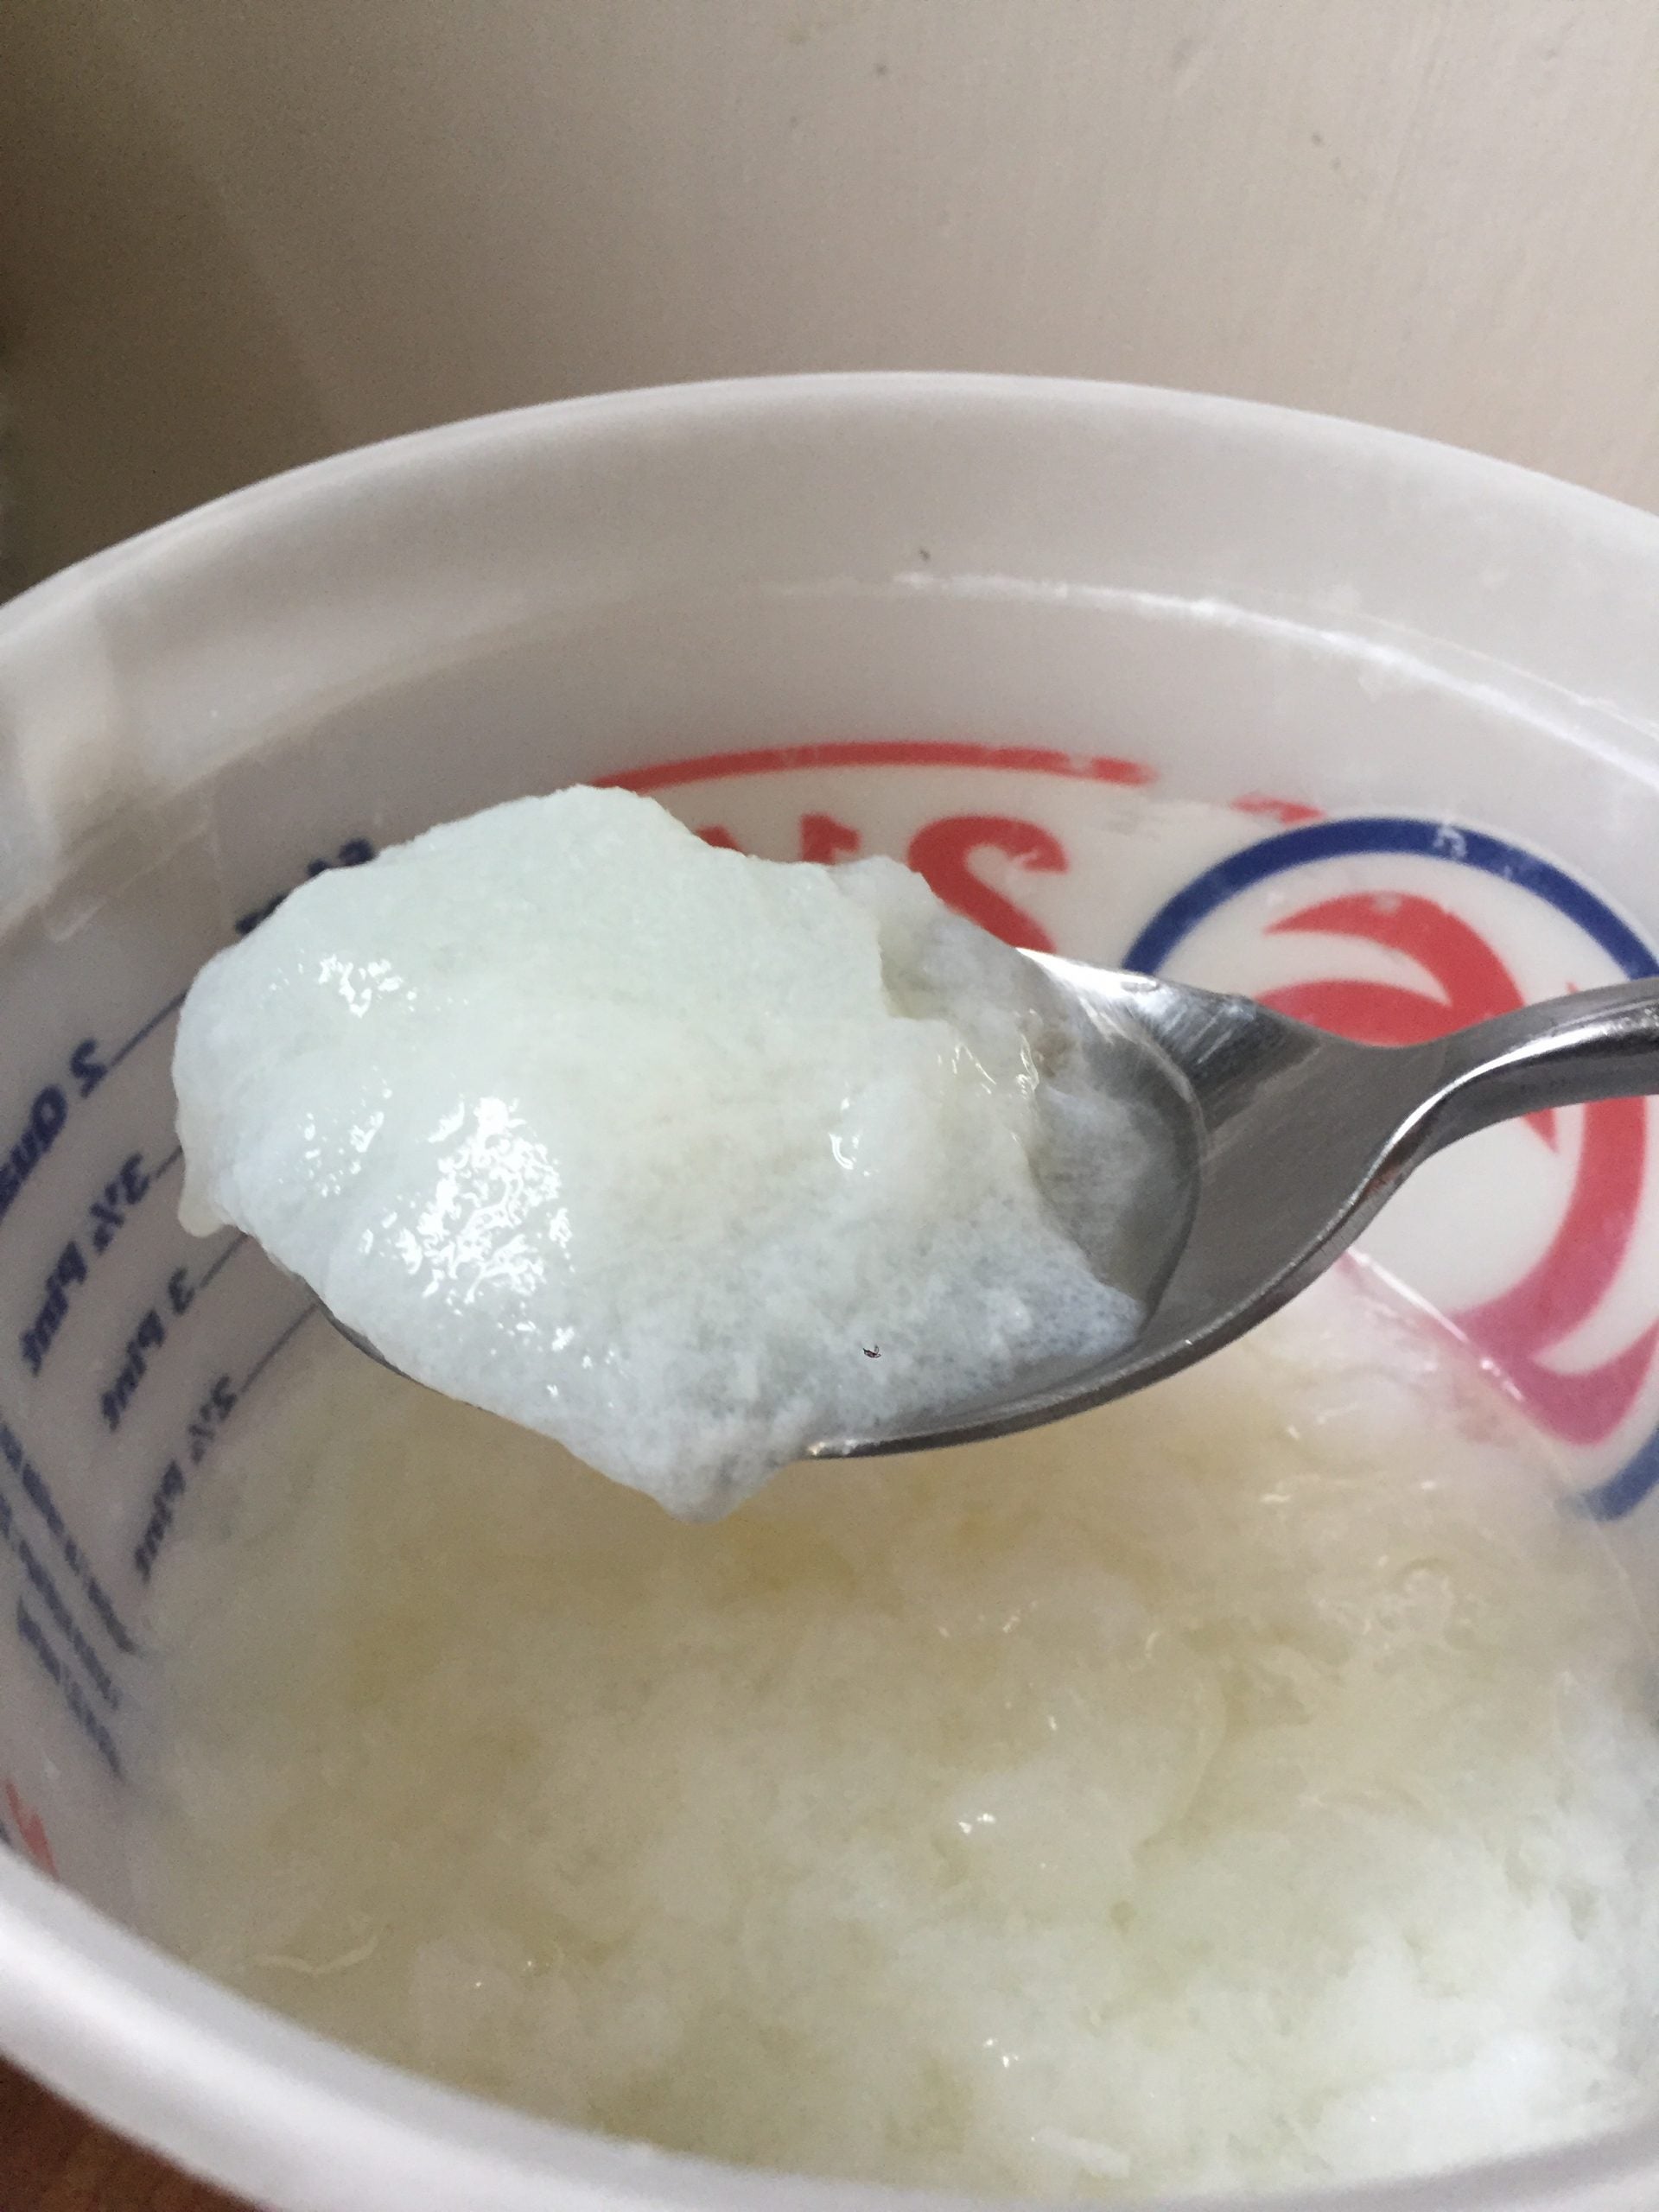 Homemade Laundry Detergent For Smelly Athletic Clothing - Thickened Soap